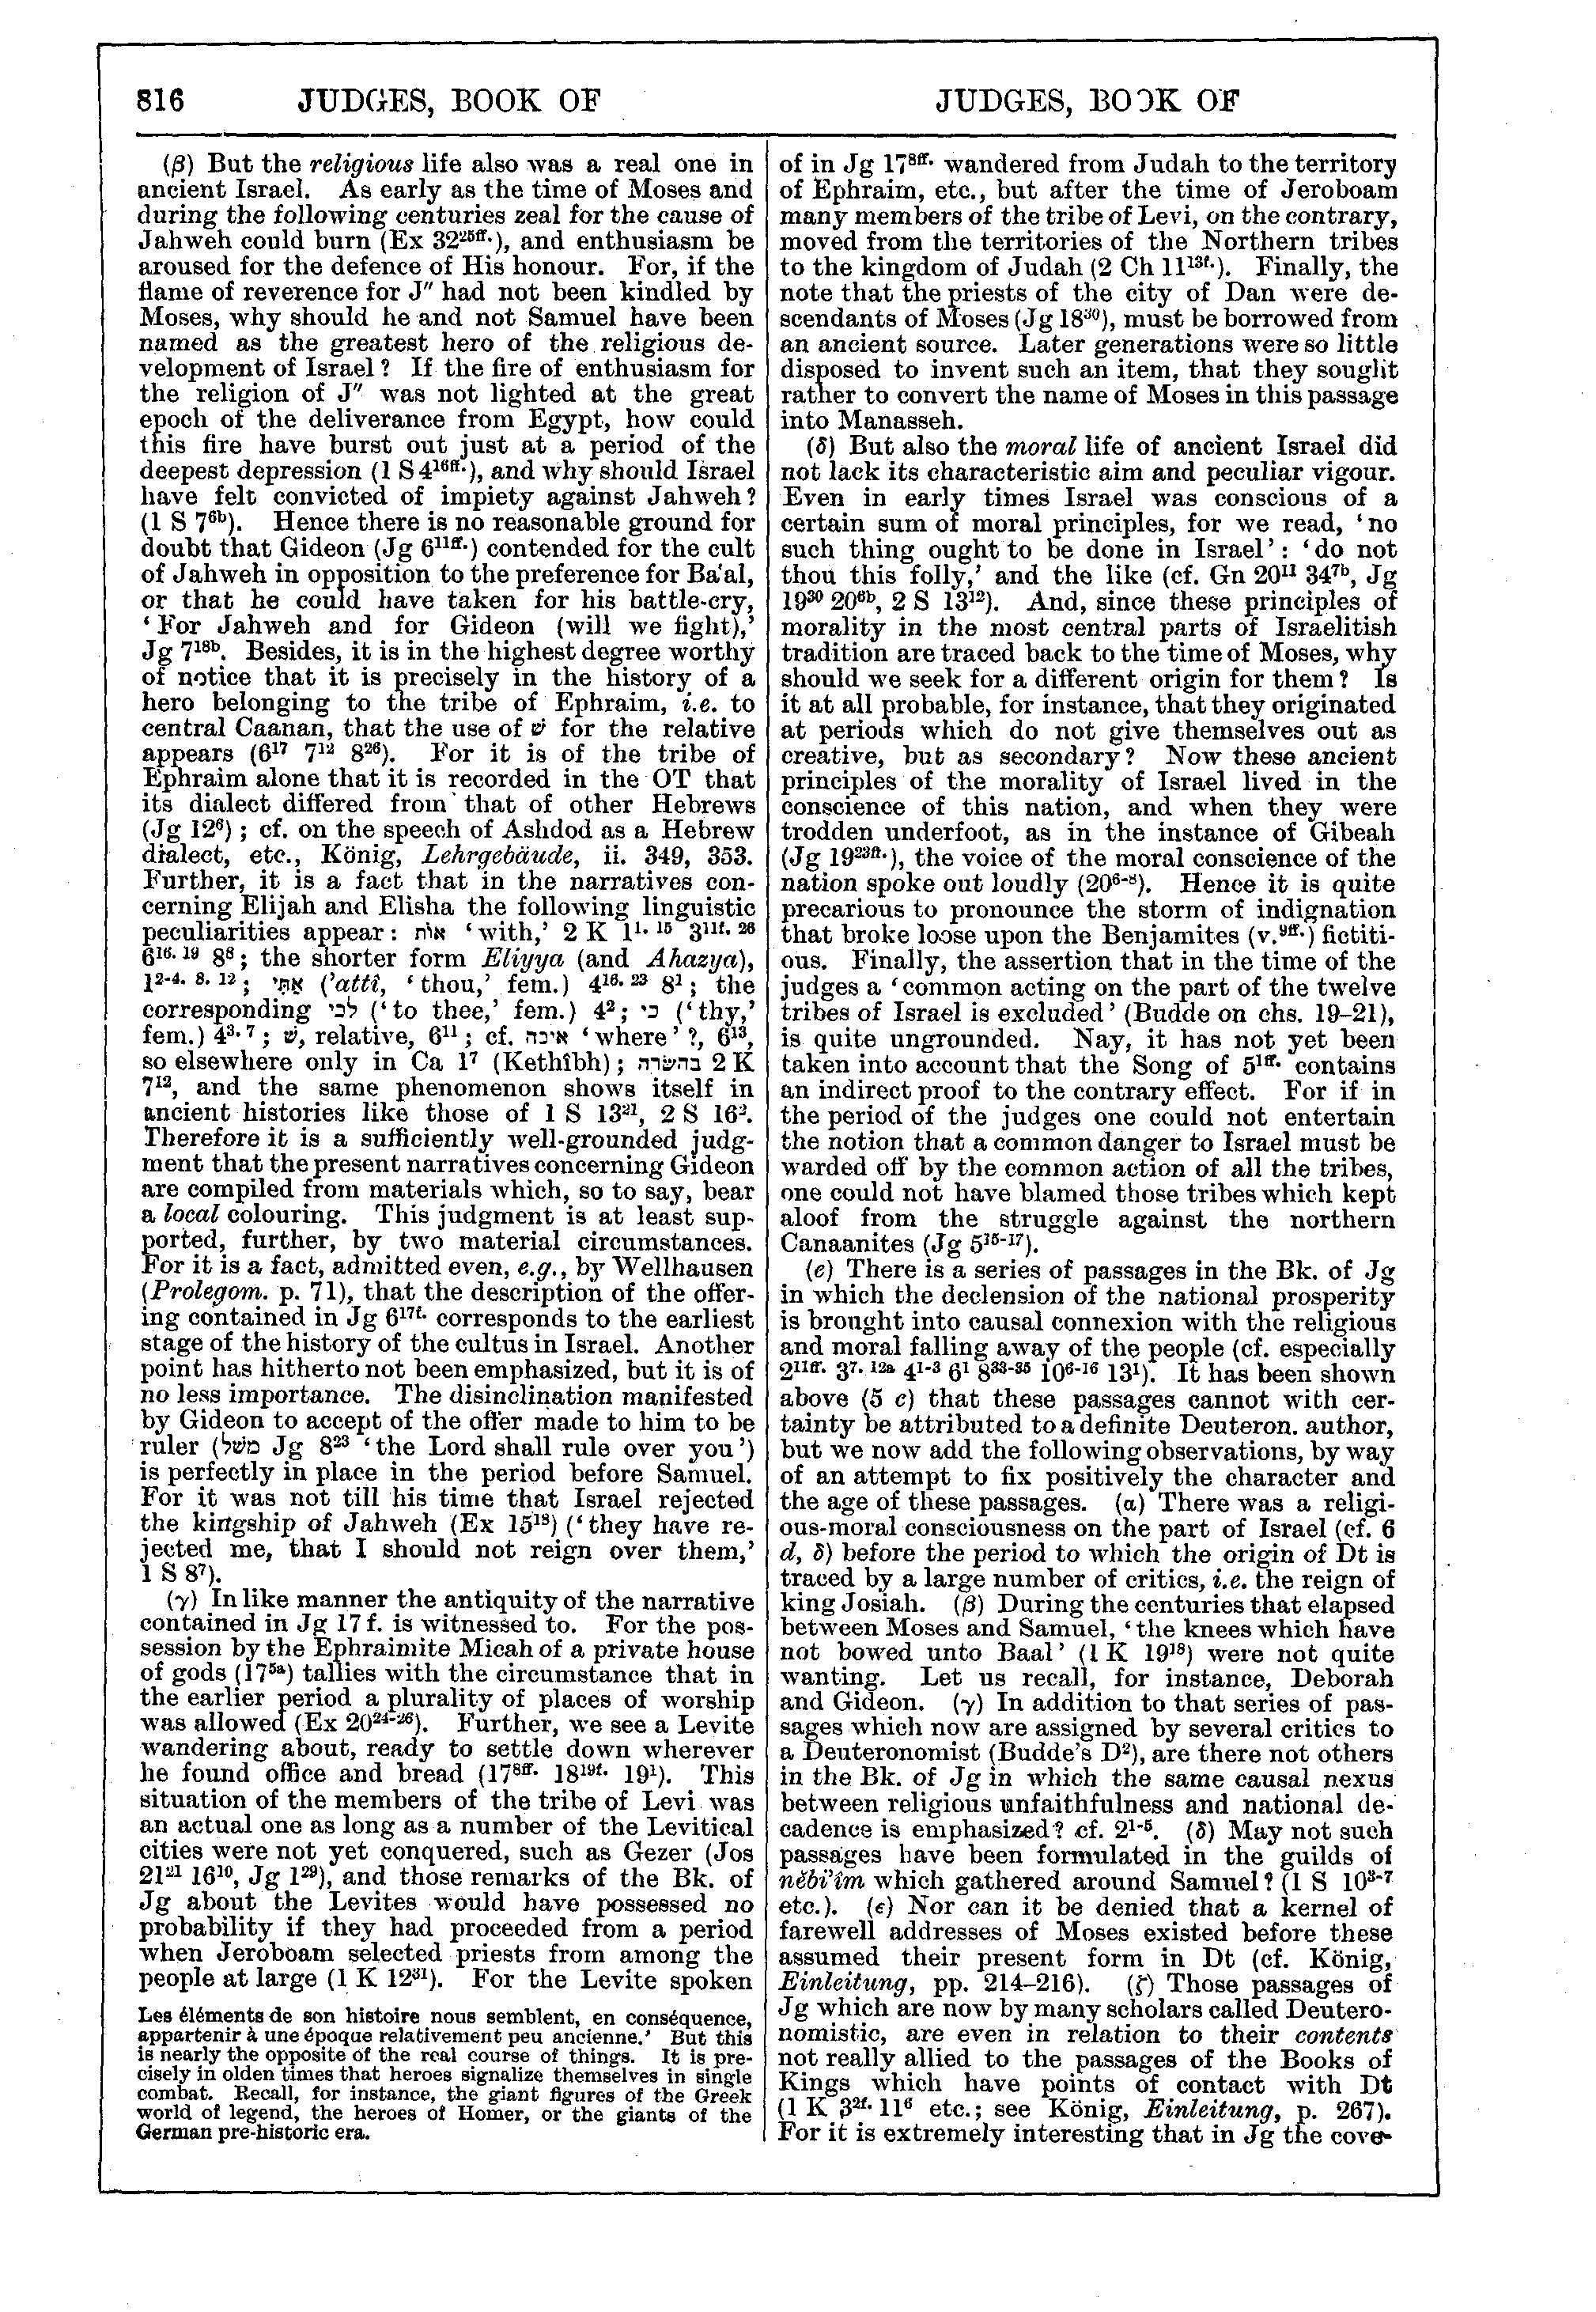 Image of page 816